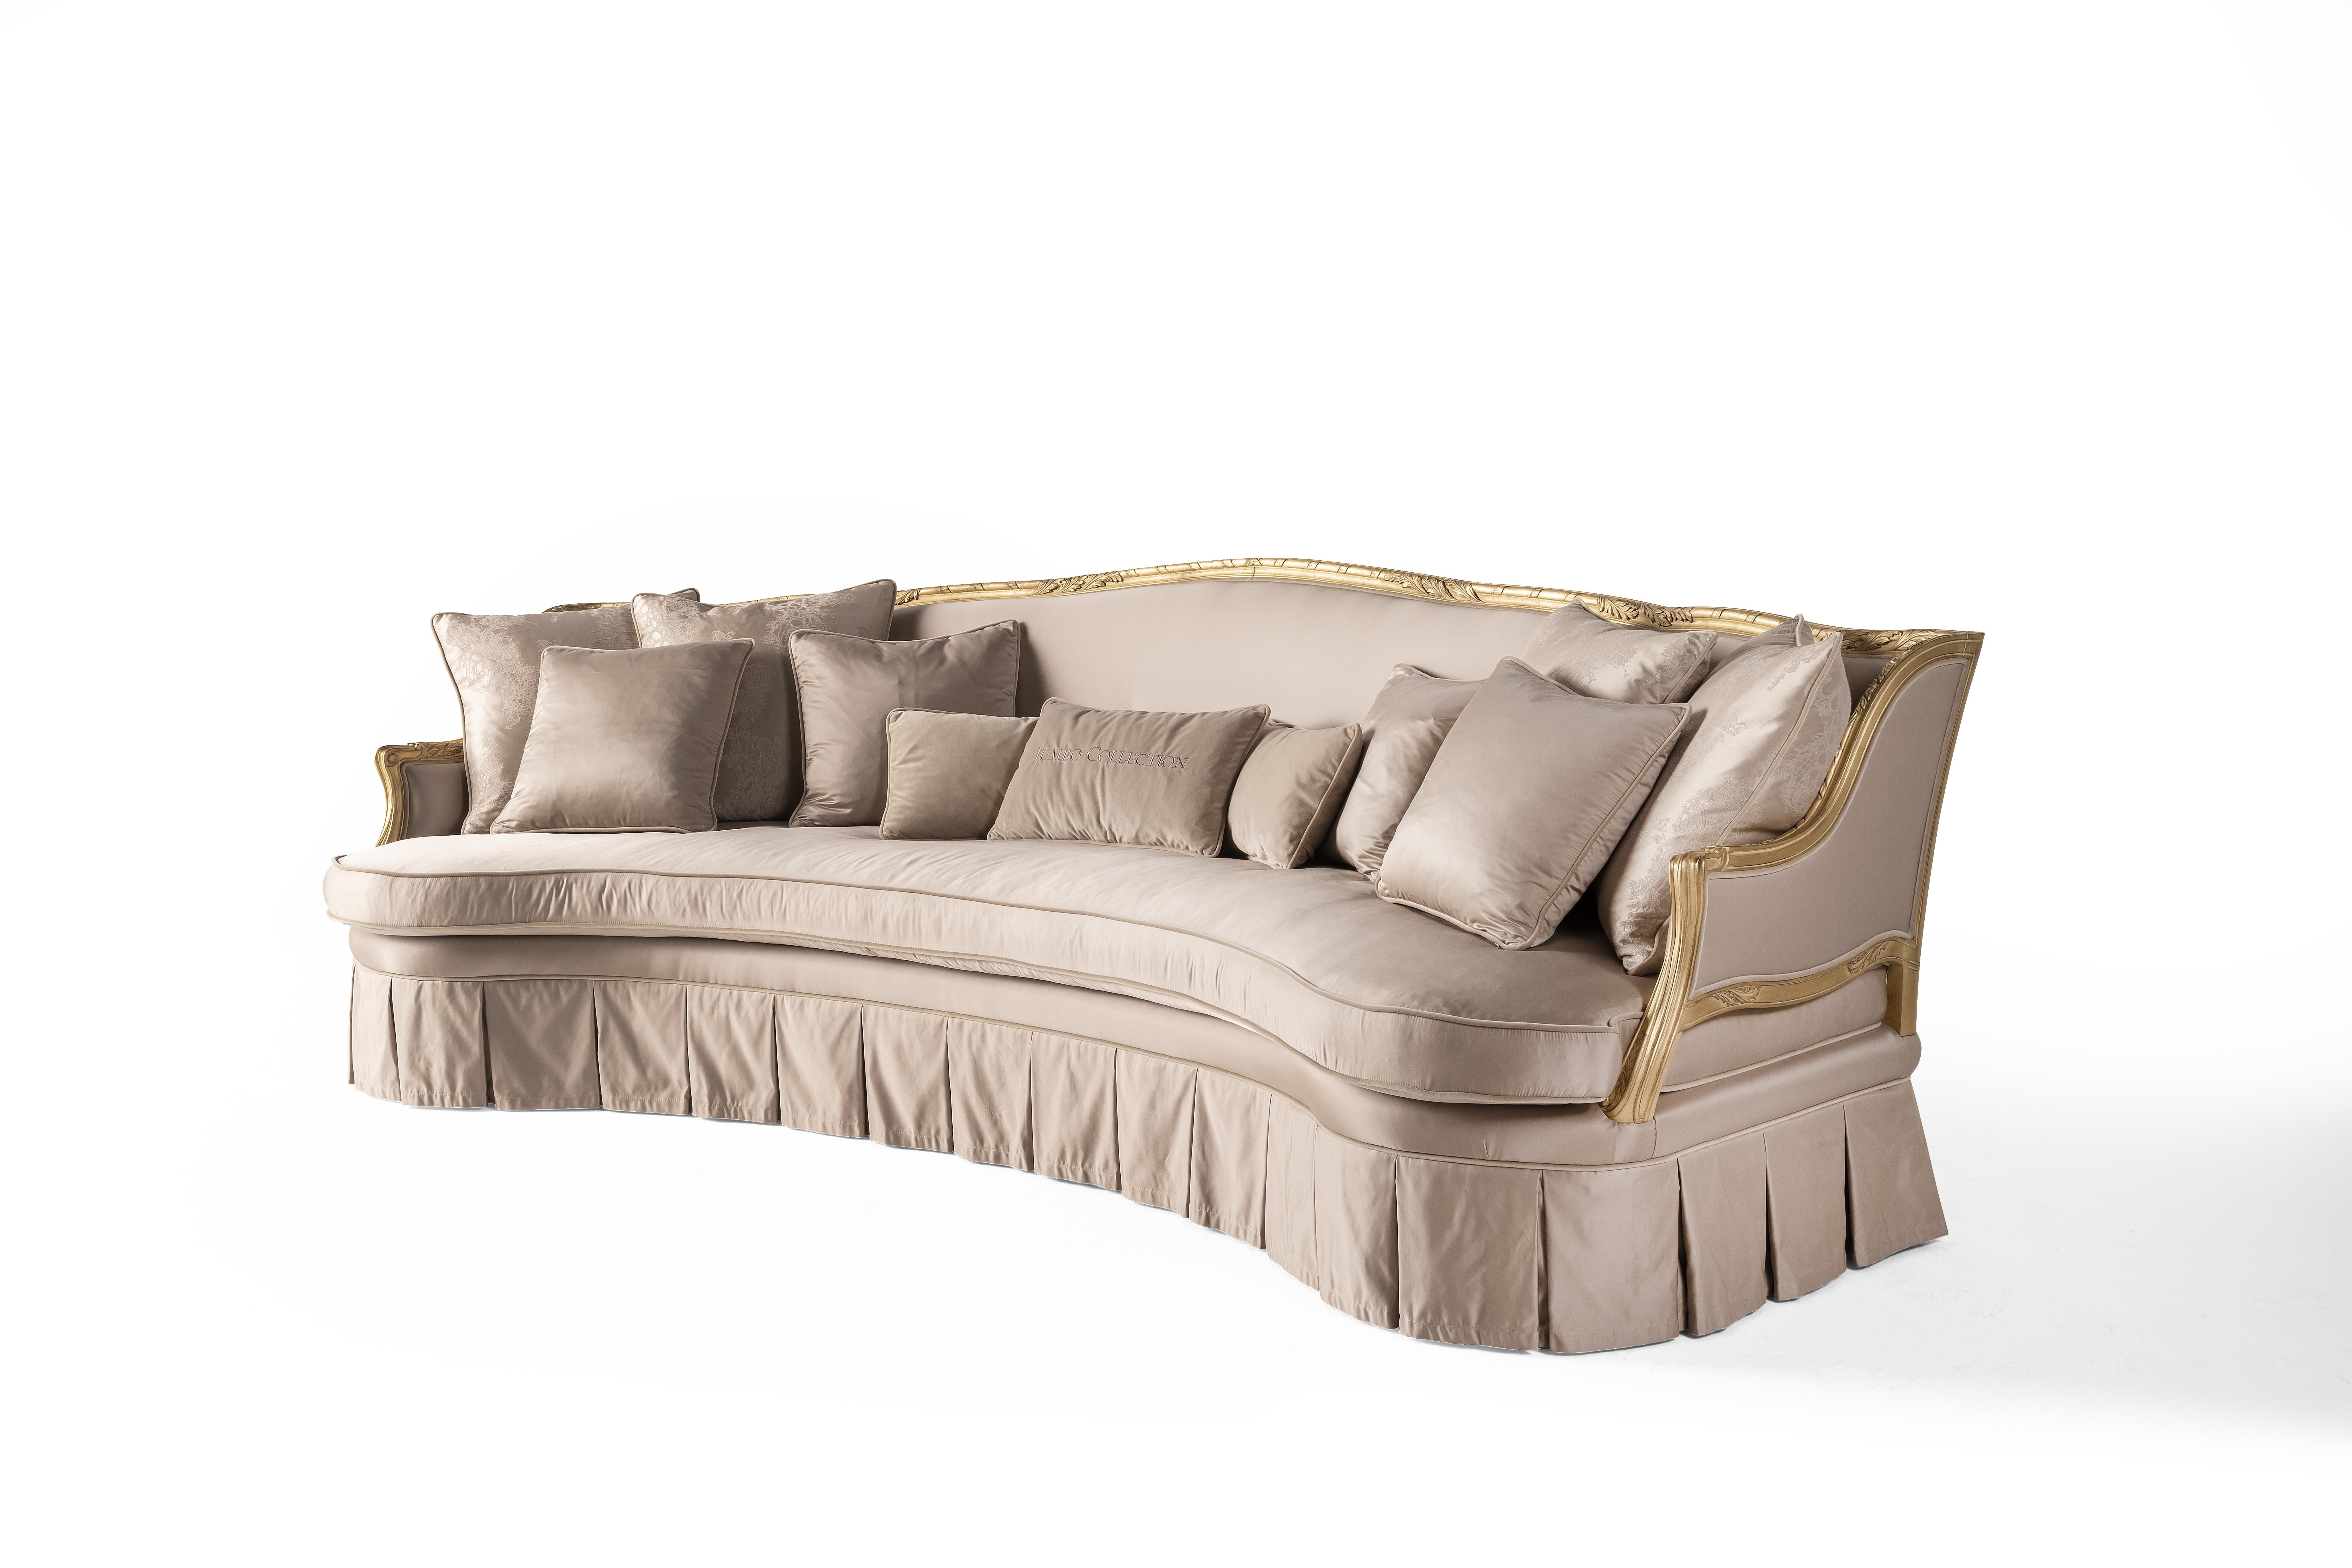 Seductive lines and precious details for the Eglantine collection. Its soft and welcoming shapes are embellished by a hand-carved profile with gold leaf finishing and by the ruching of the fabric that enriches the base. The perfect furniture for a